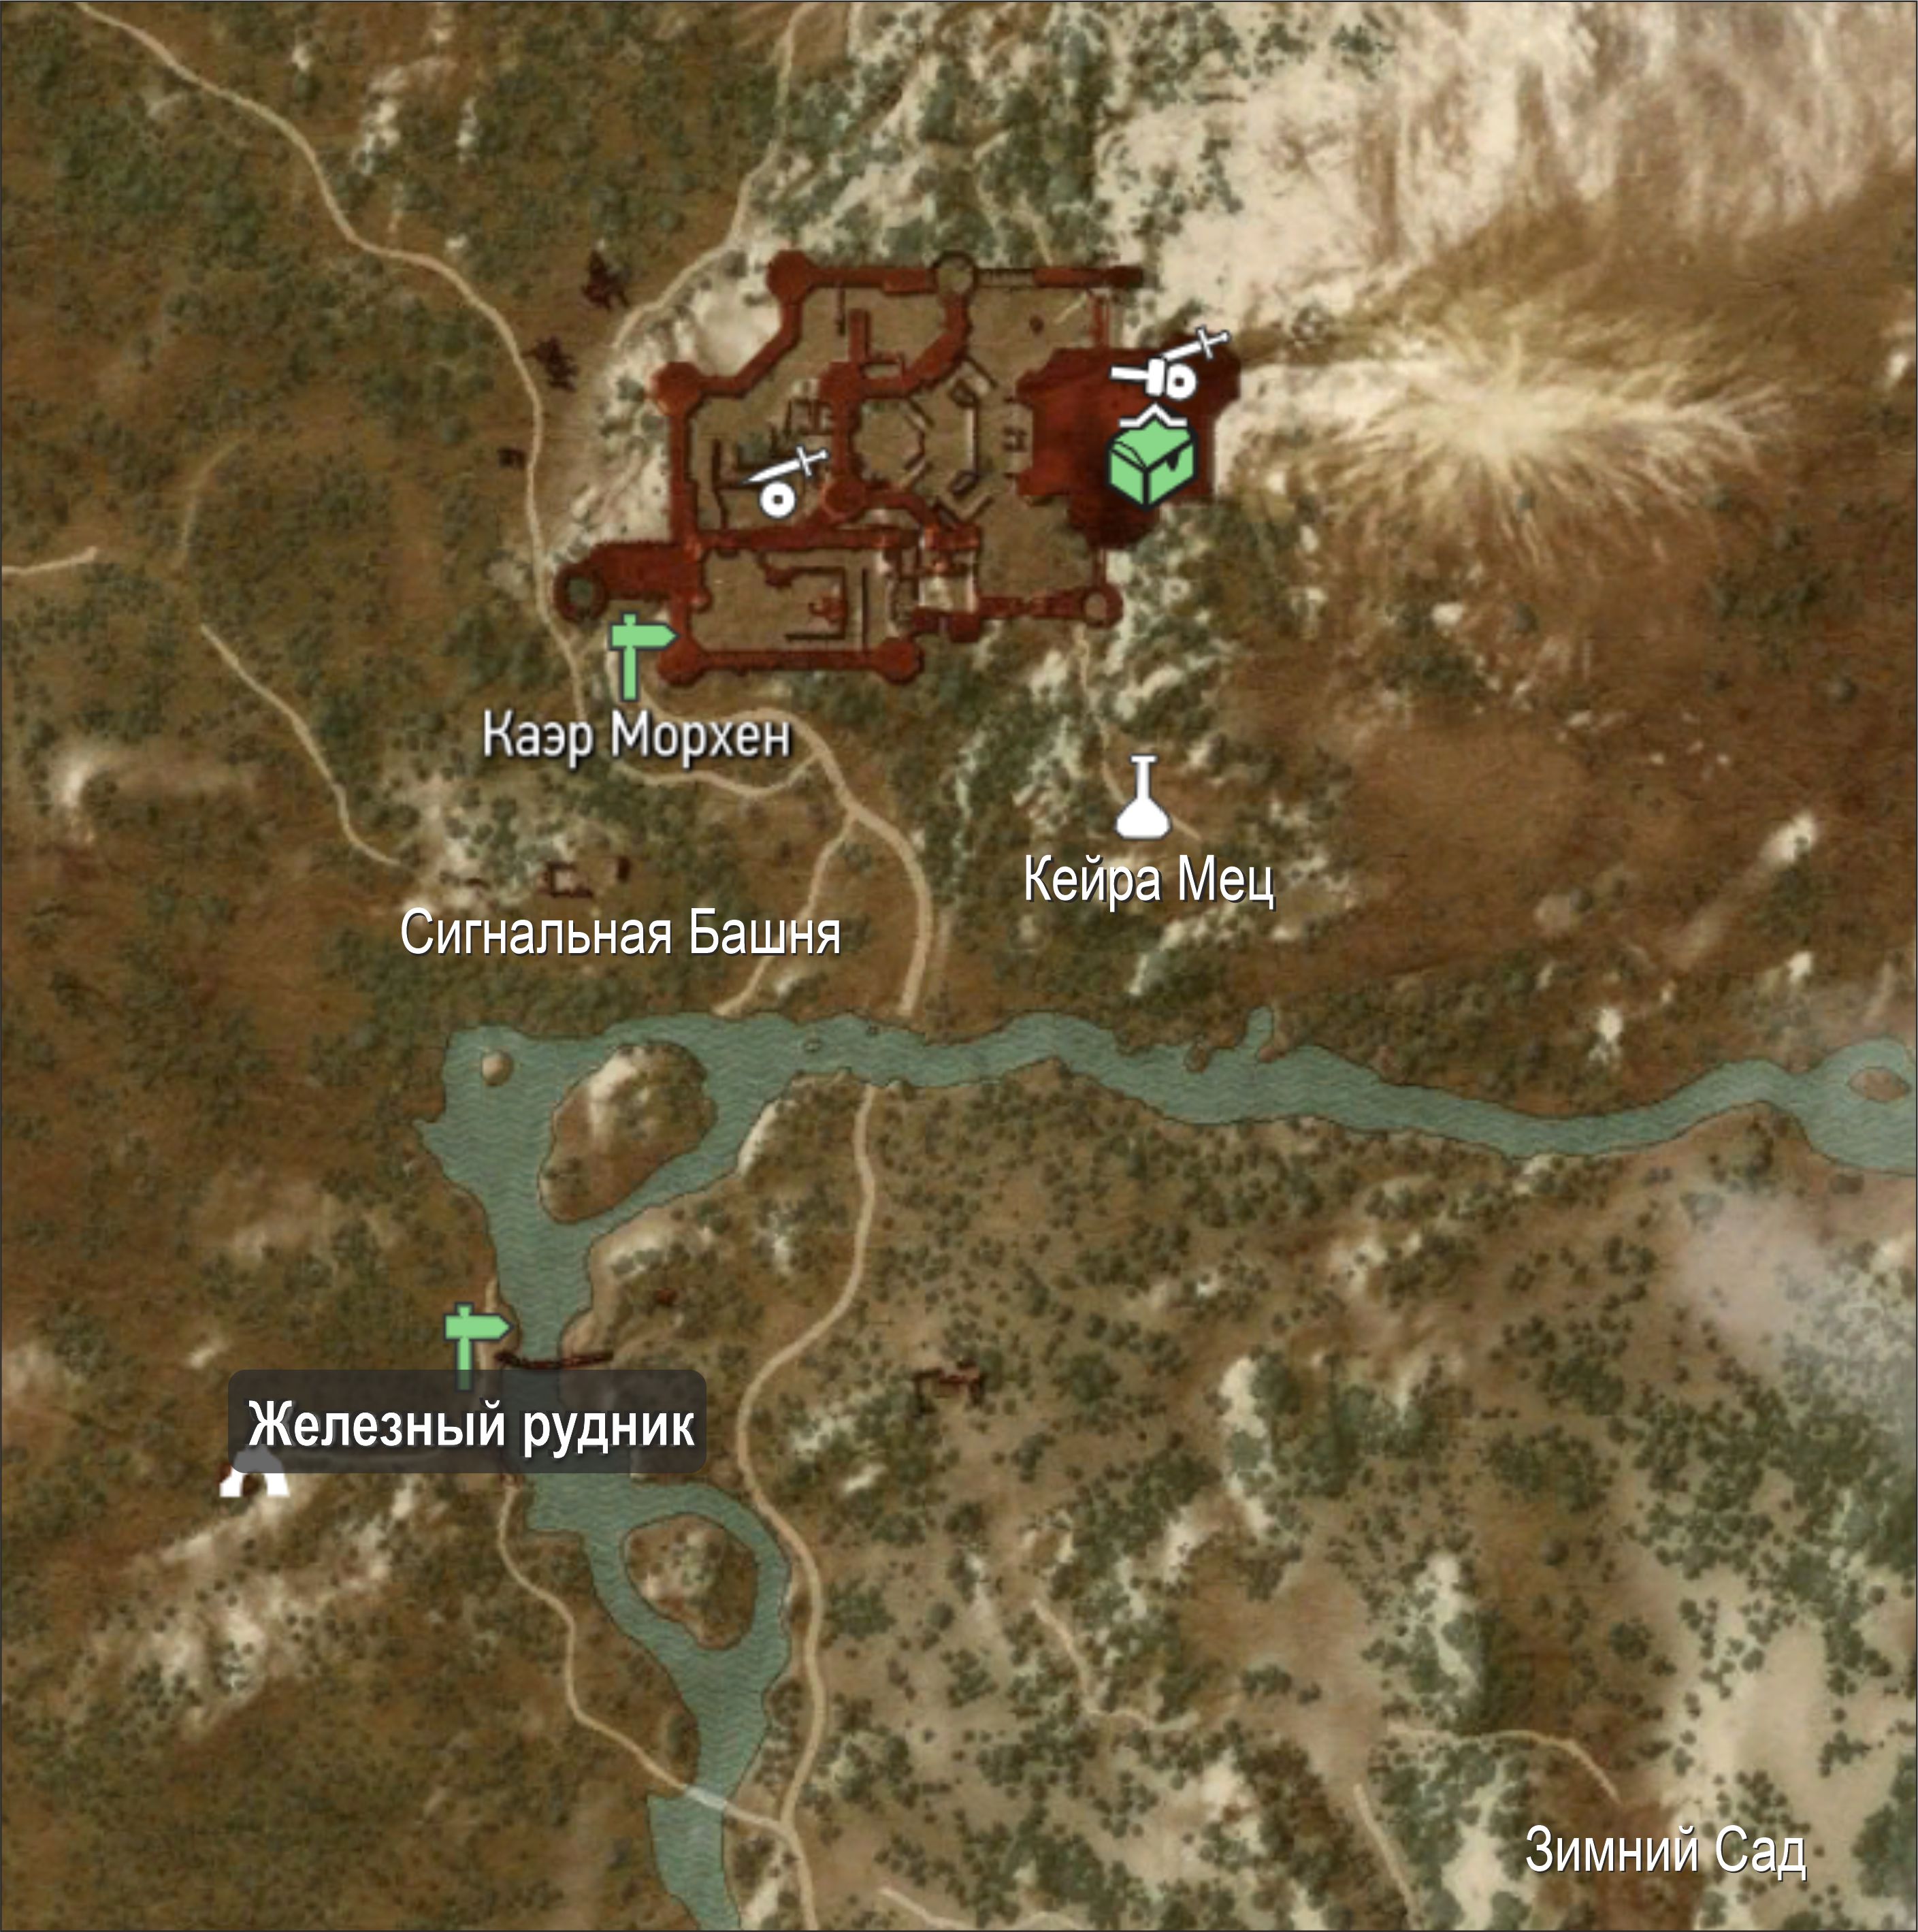 The witcher 3 witcher gear locations фото 99